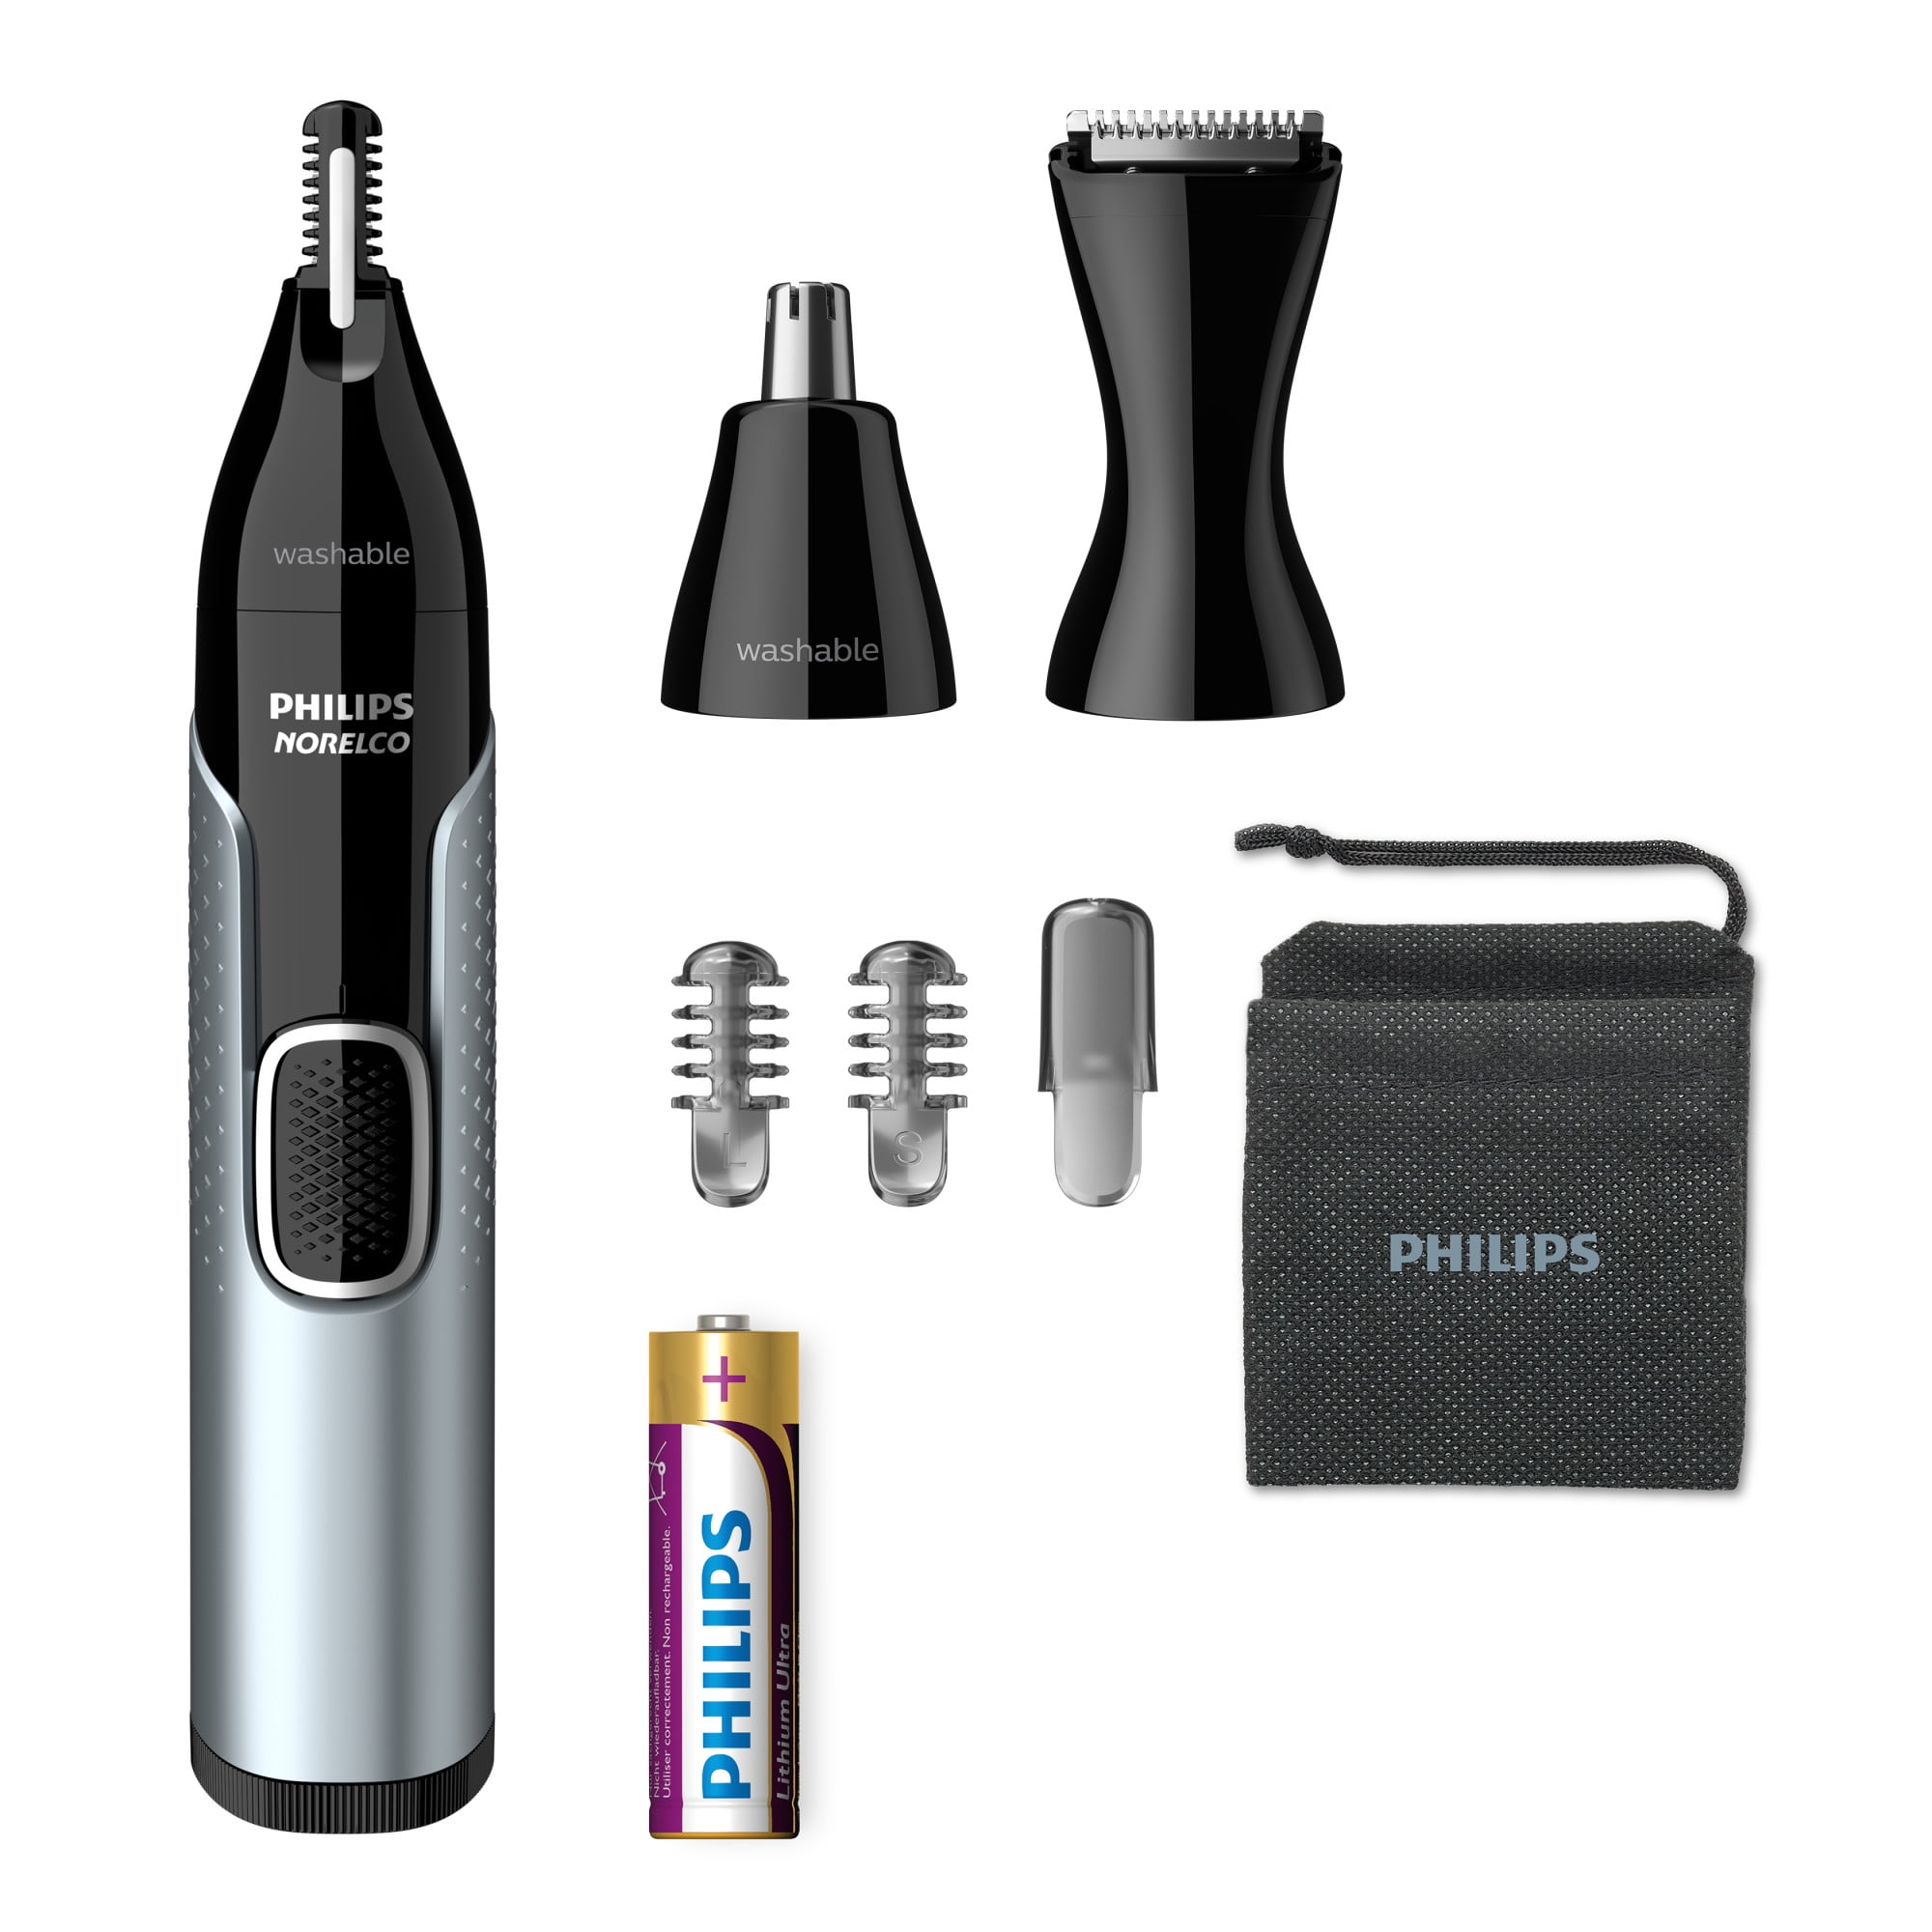 Philips Norelco Nose Trimmer 5000 For Nose, Ears, Eyebrows Trimming Kit,  NT5600/42 